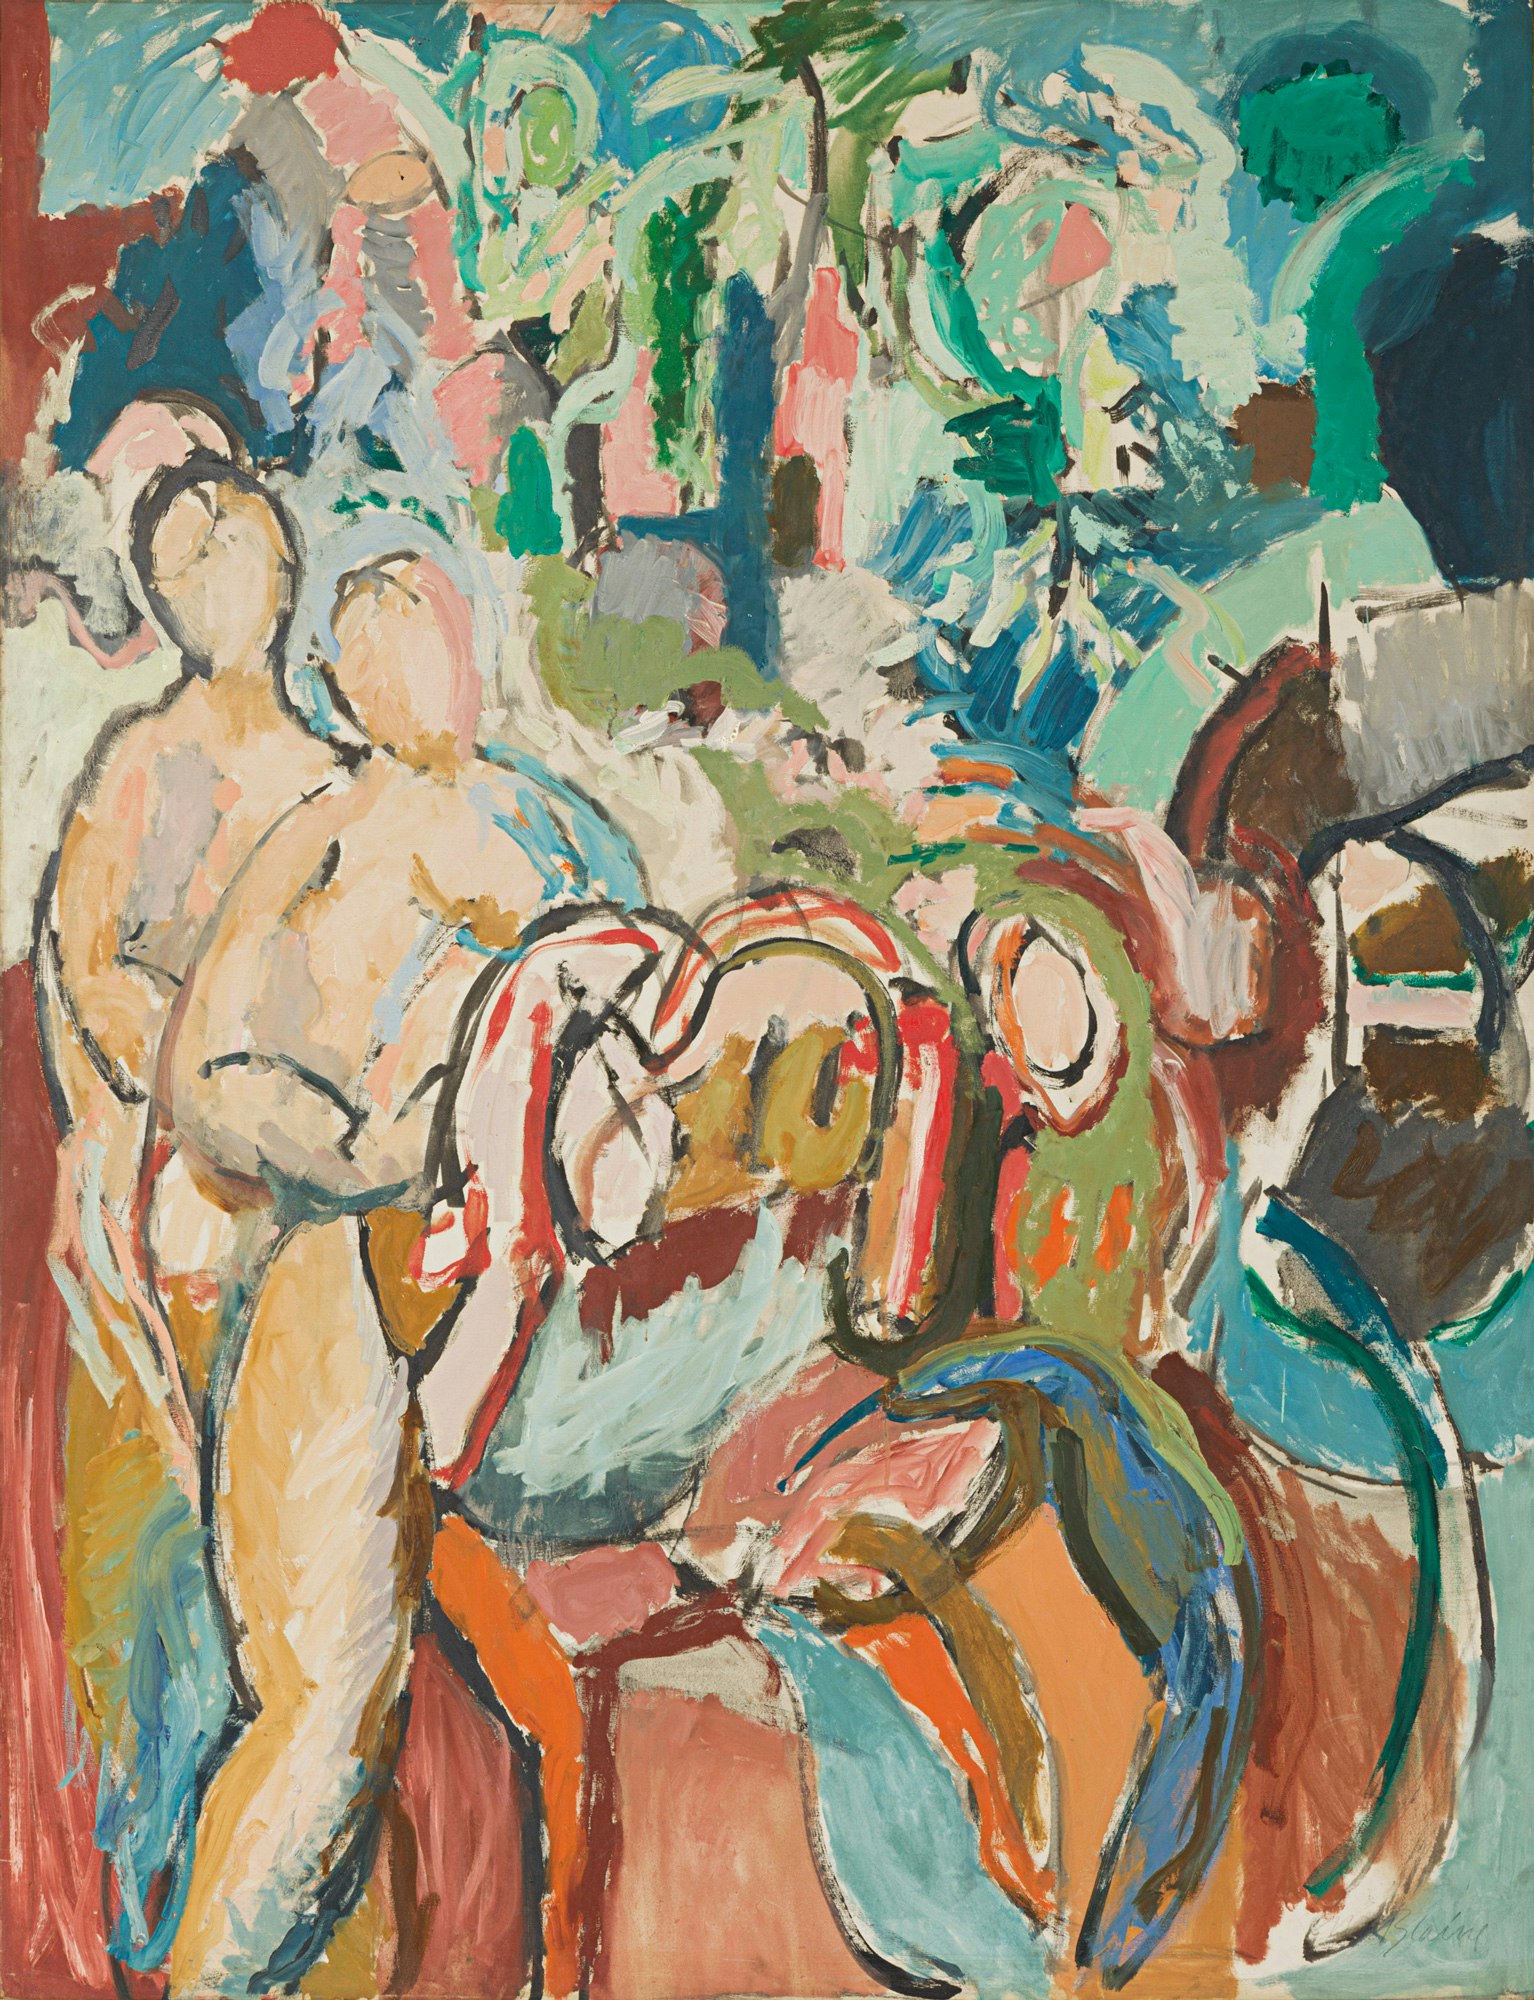 Nell Blaine, <i>Merry-Go Round,</i> 1955, oil on canvas, 70 x 54 inches, 177.8 x 137.2 cm. Courtesy Reynolds Gallery and Kasmin Gallery.